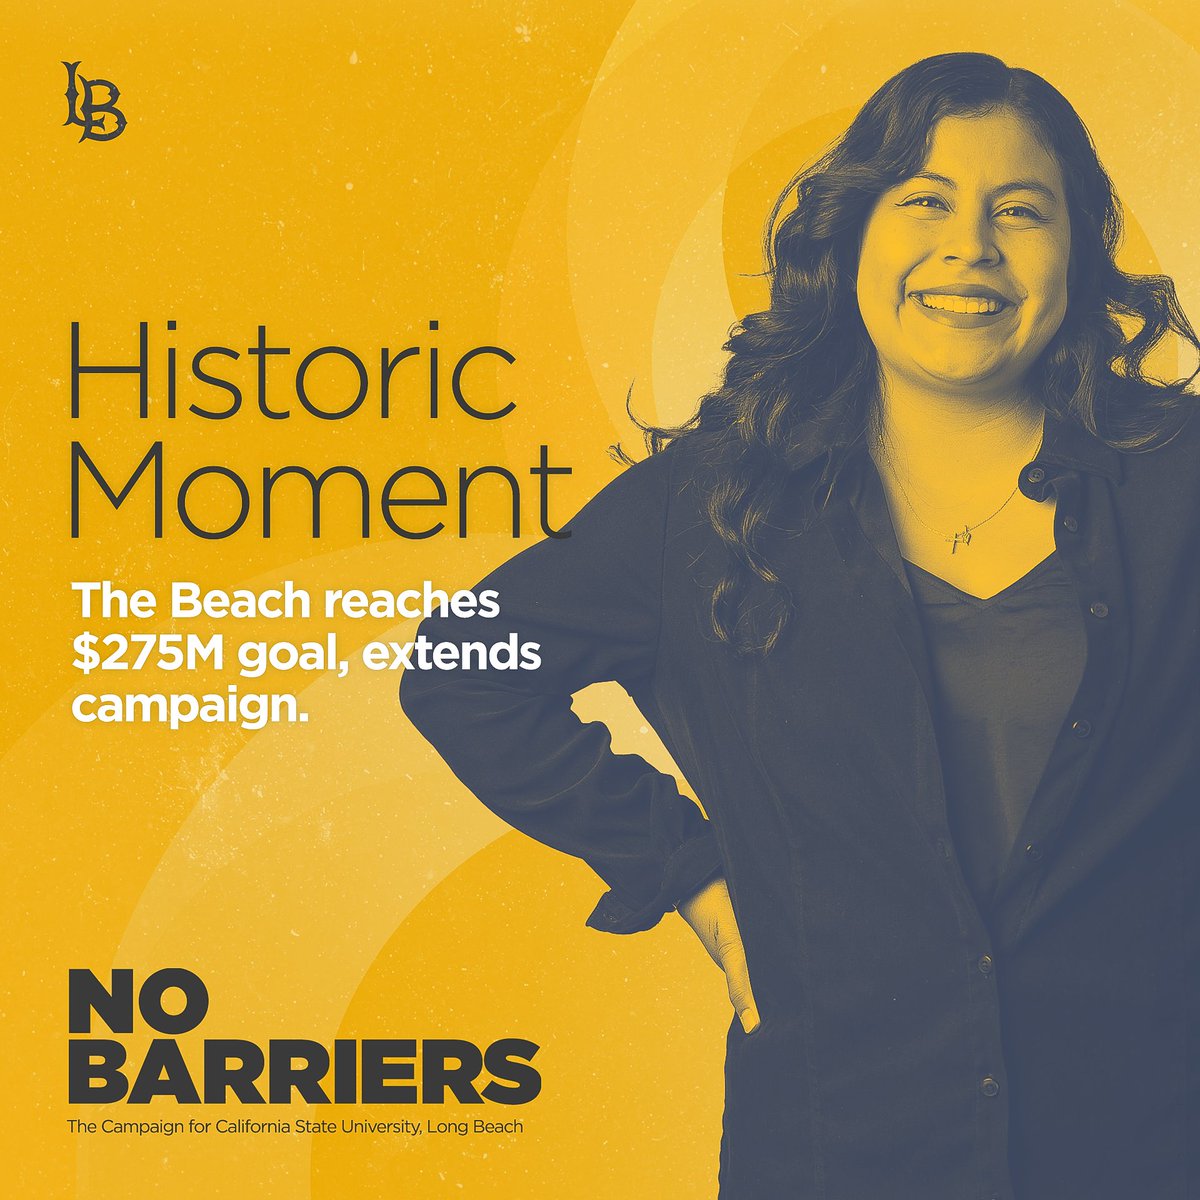 Go Beach! Cal State Long Beach has reached its $275 million fundraising goal for its #NoBarriers campaign. The campaign will be extended until the launch of the university’s 75th anniversary celebration in late September. Read more here: csulb.edu/no-barriers/ar…